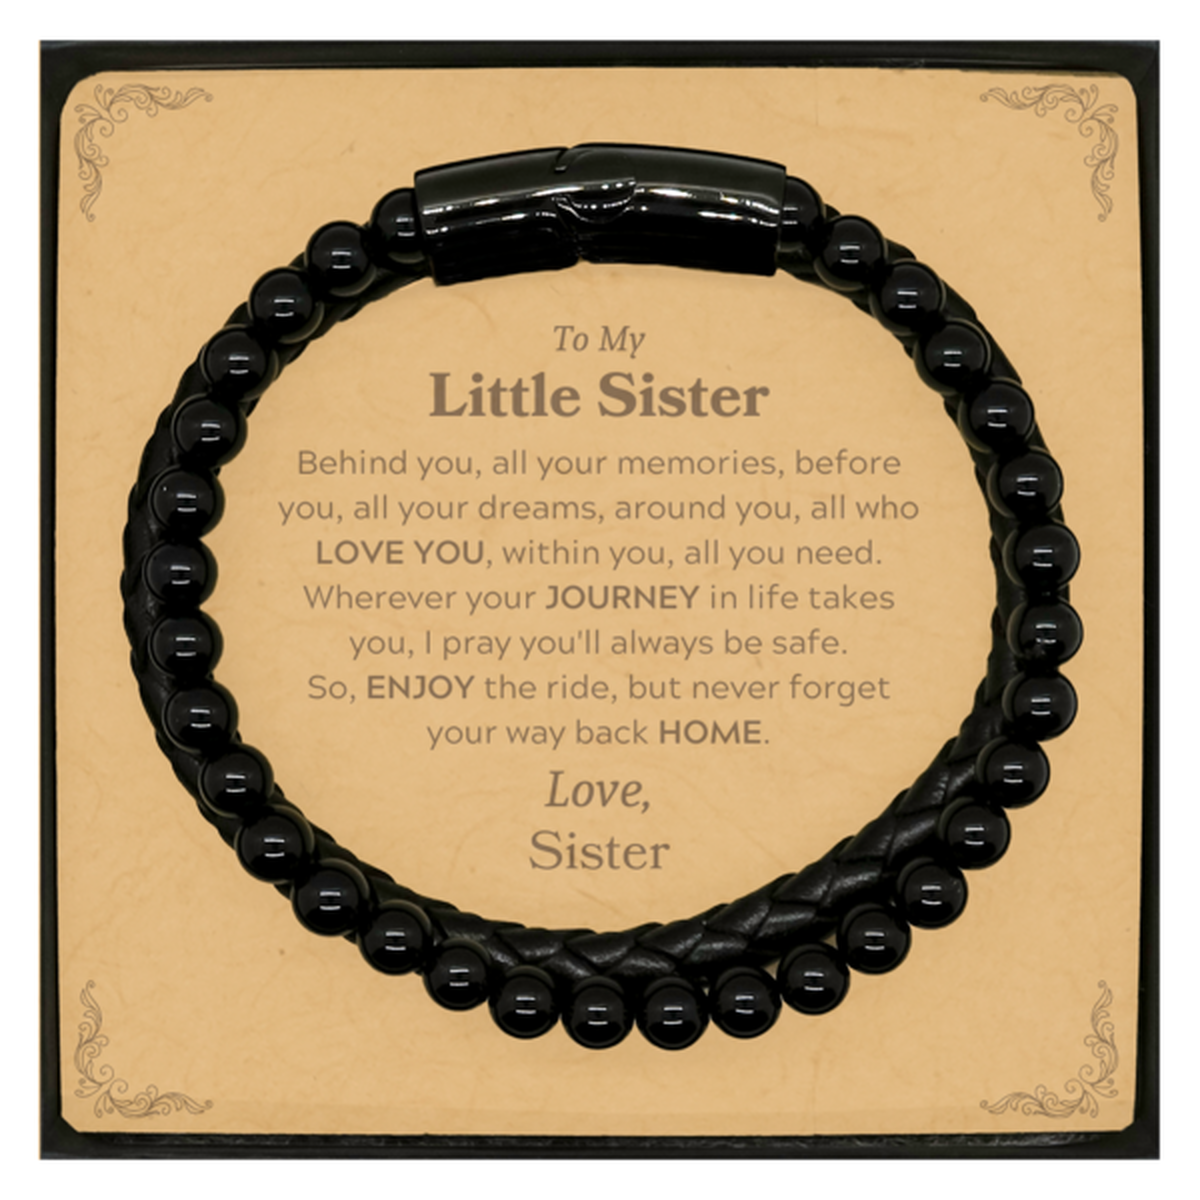 To My Little Sister Graduation Gifts from Sister, Little Sister Stone Leather Bracelets Christmas Birthday Gifts for Little Sister Behind you, all your memories, before you, all your dreams. Love, Sister